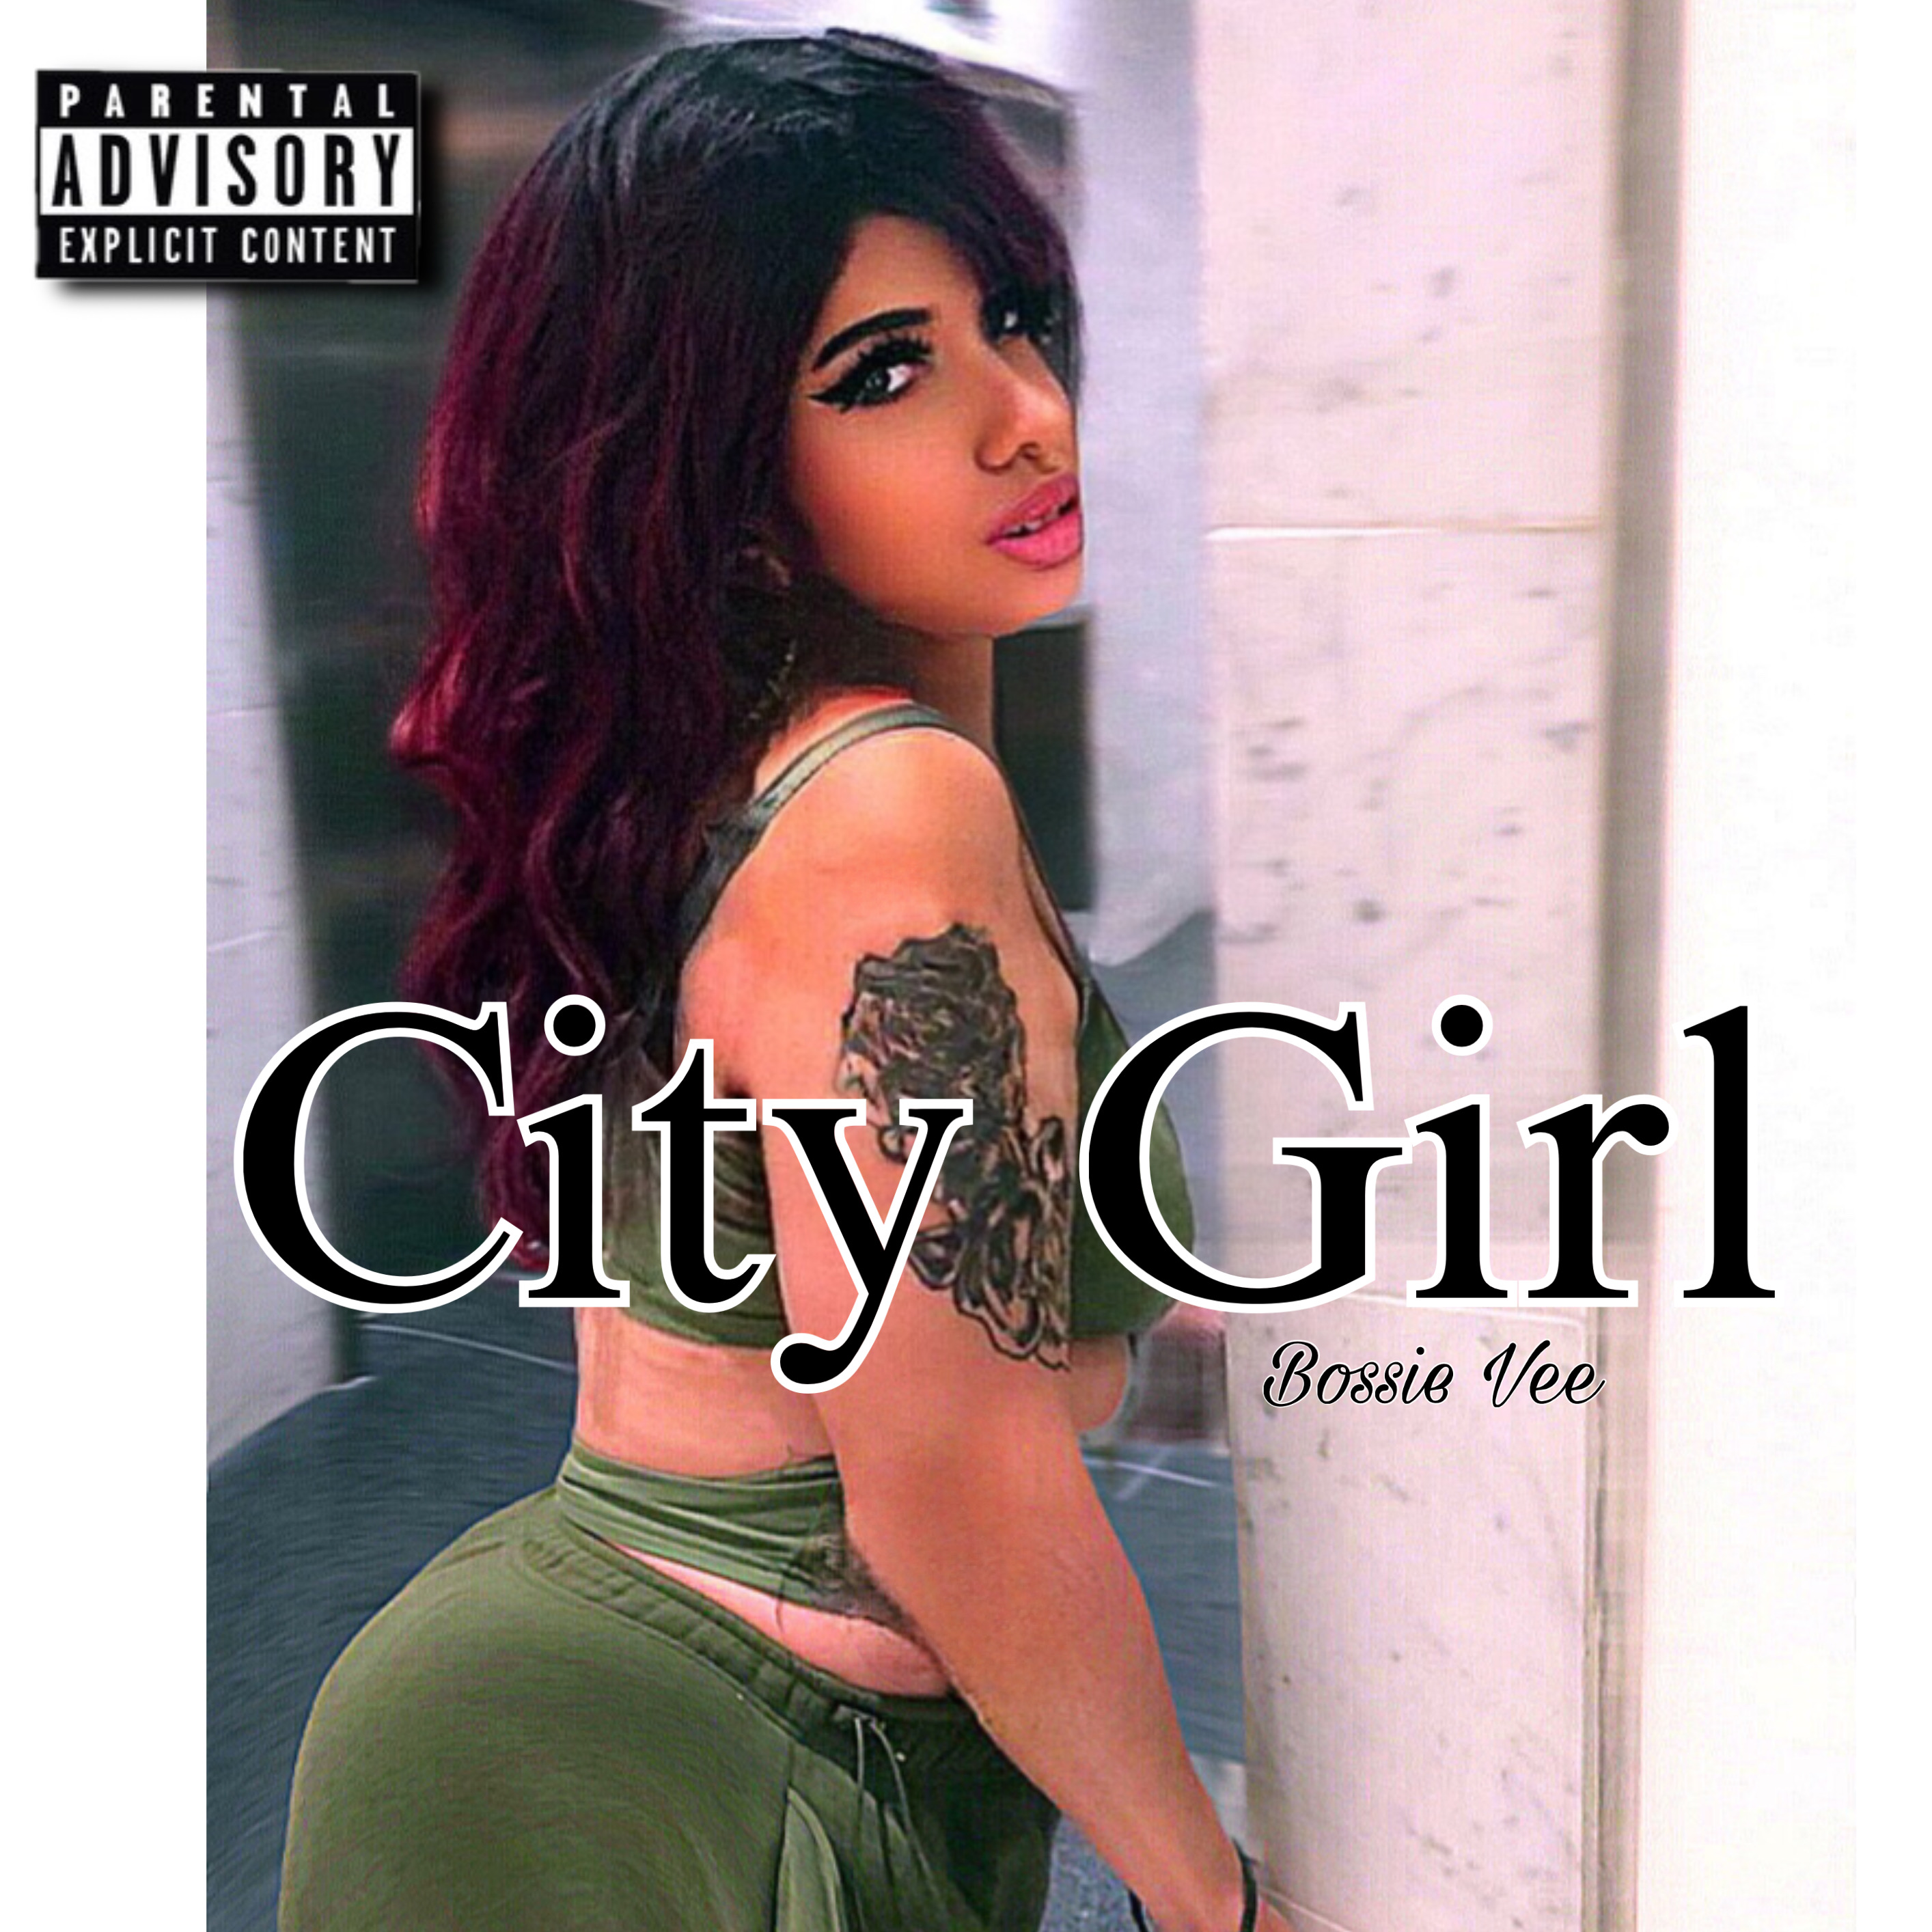 Art for City Girl by Bossie Vee